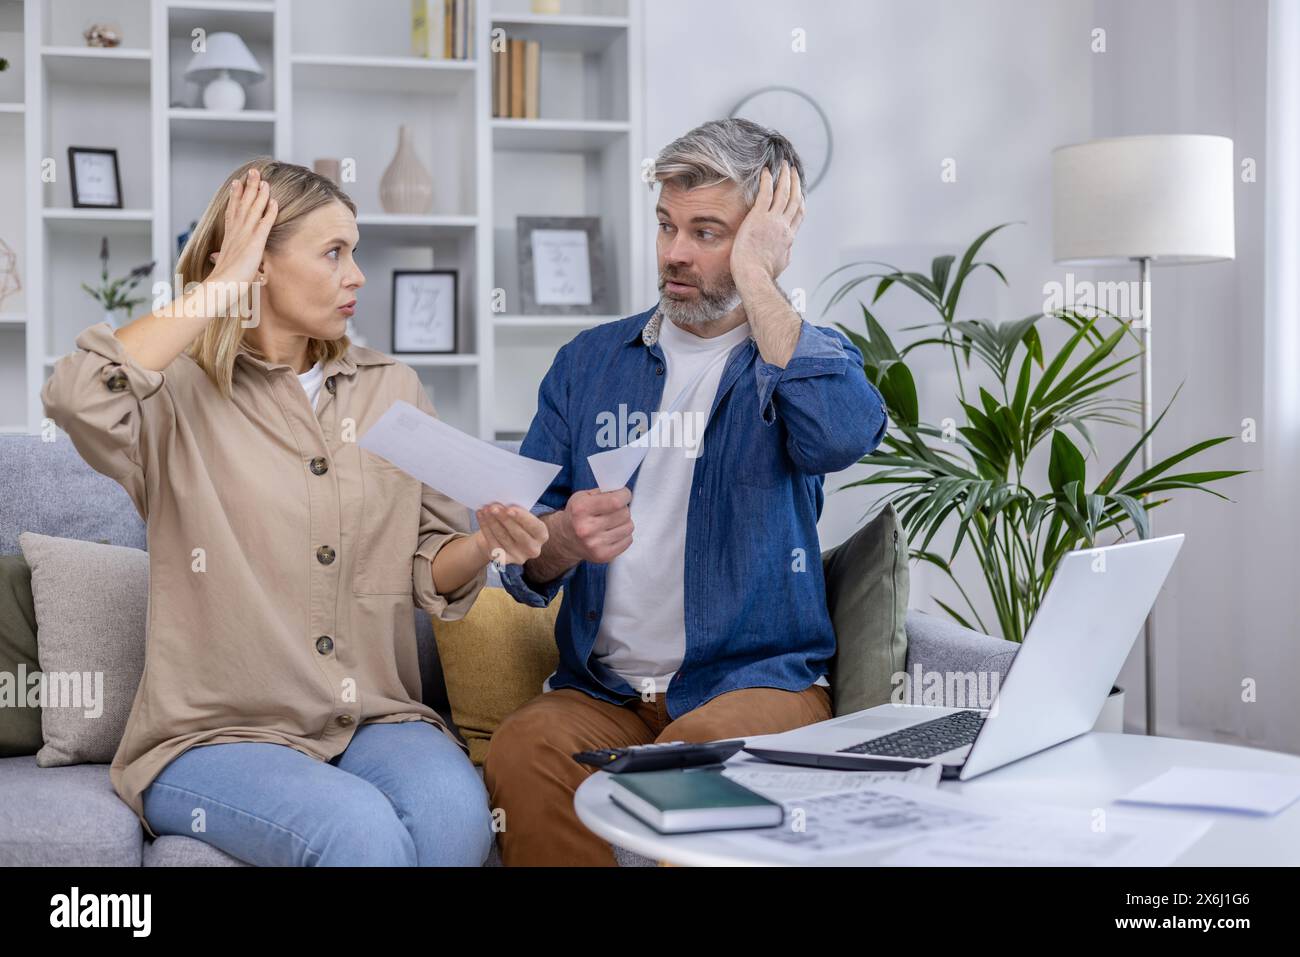 Stressed couple sitting on the couch discussing bills and finances. They appear worried while holding papers in their hands and looking at each other. Stock Photo